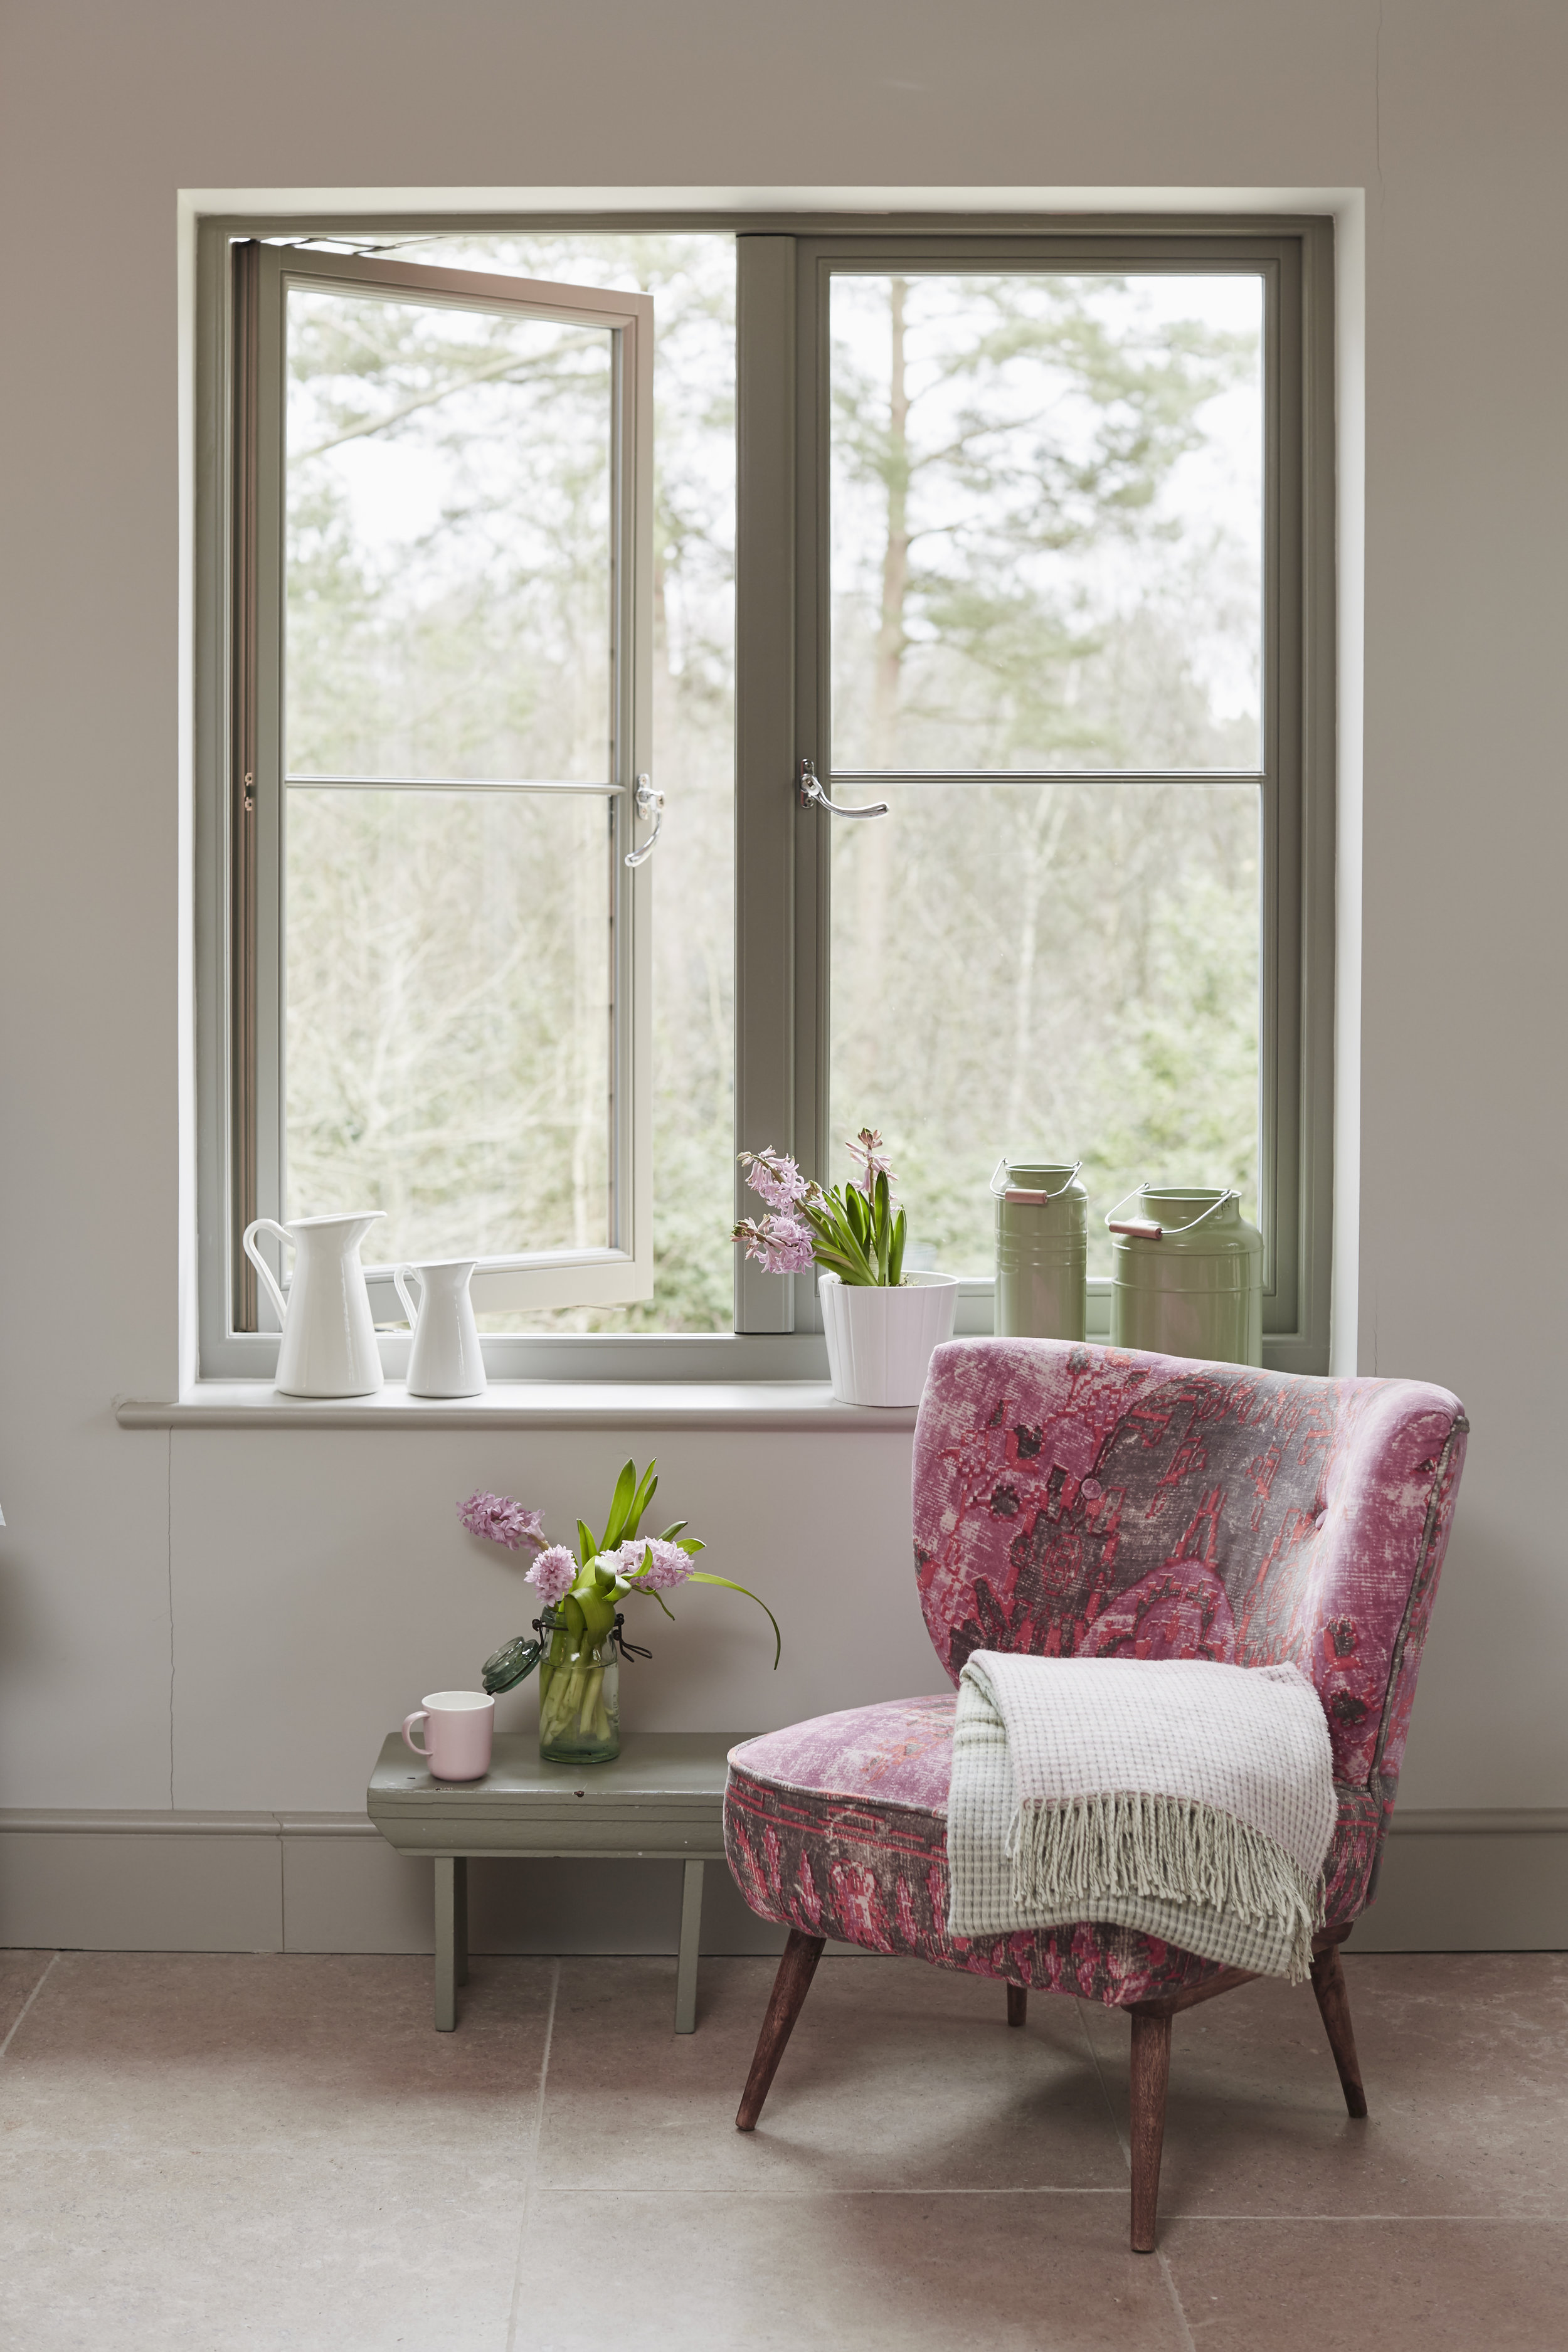 Updated traditional window frames - Image: BERECO